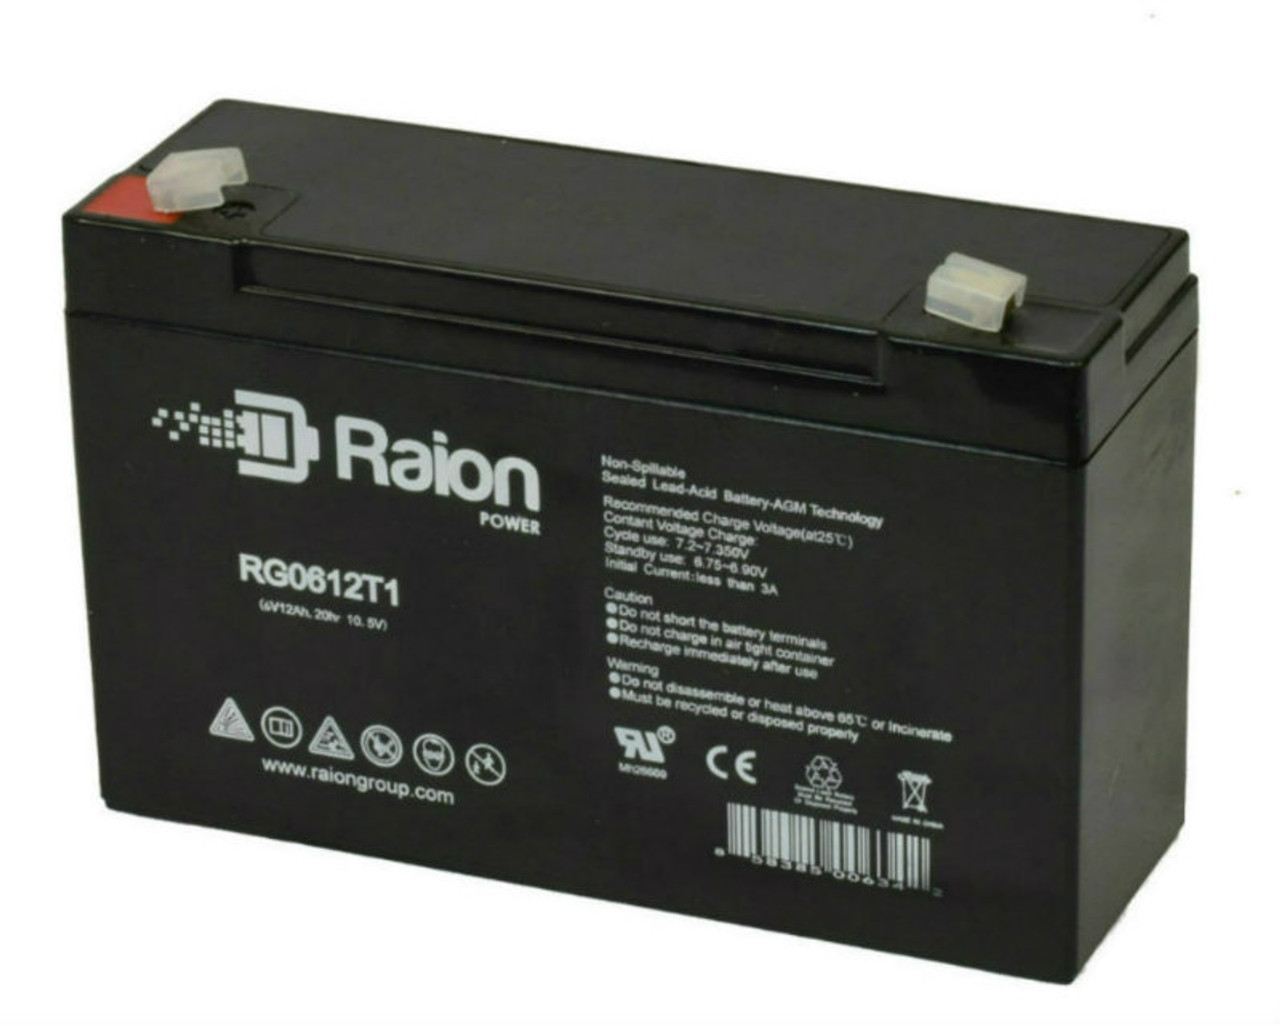 Raion Power RG06120T1 Replacement 6V 12Ah Emergency Light Battery for Trio TL930011